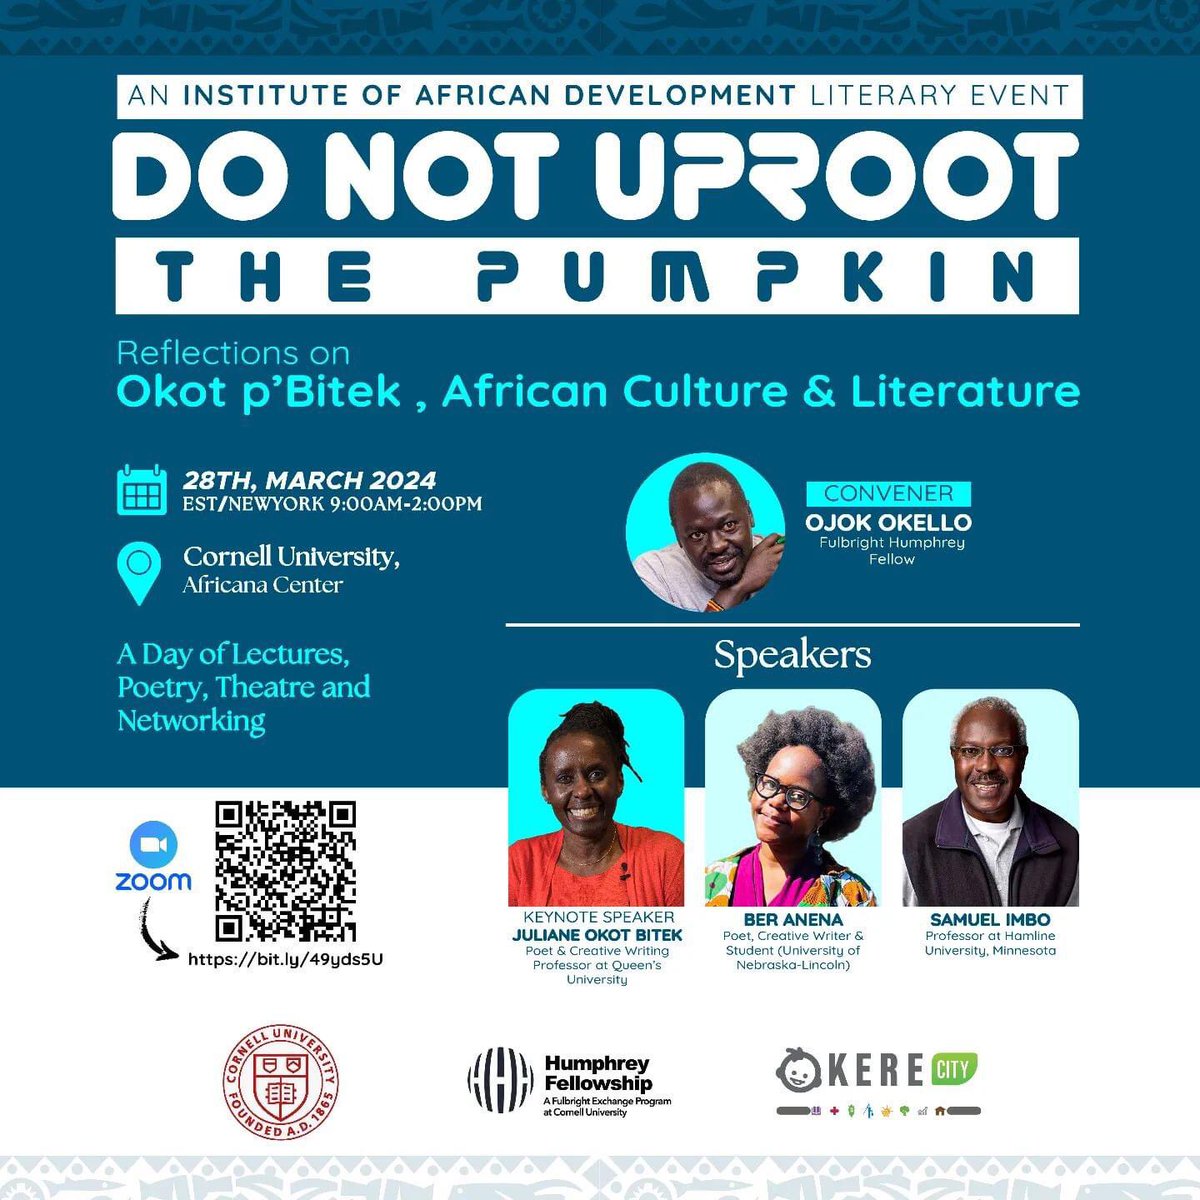 We are partnering with @IADCornellUniv to convene the #OkotpBitek legacy seminar. @jobitek, @ahpetite are among the speakers. Please mark your calendars and make a date with us on March, 28th as we relish in the wisdom of an African giant.